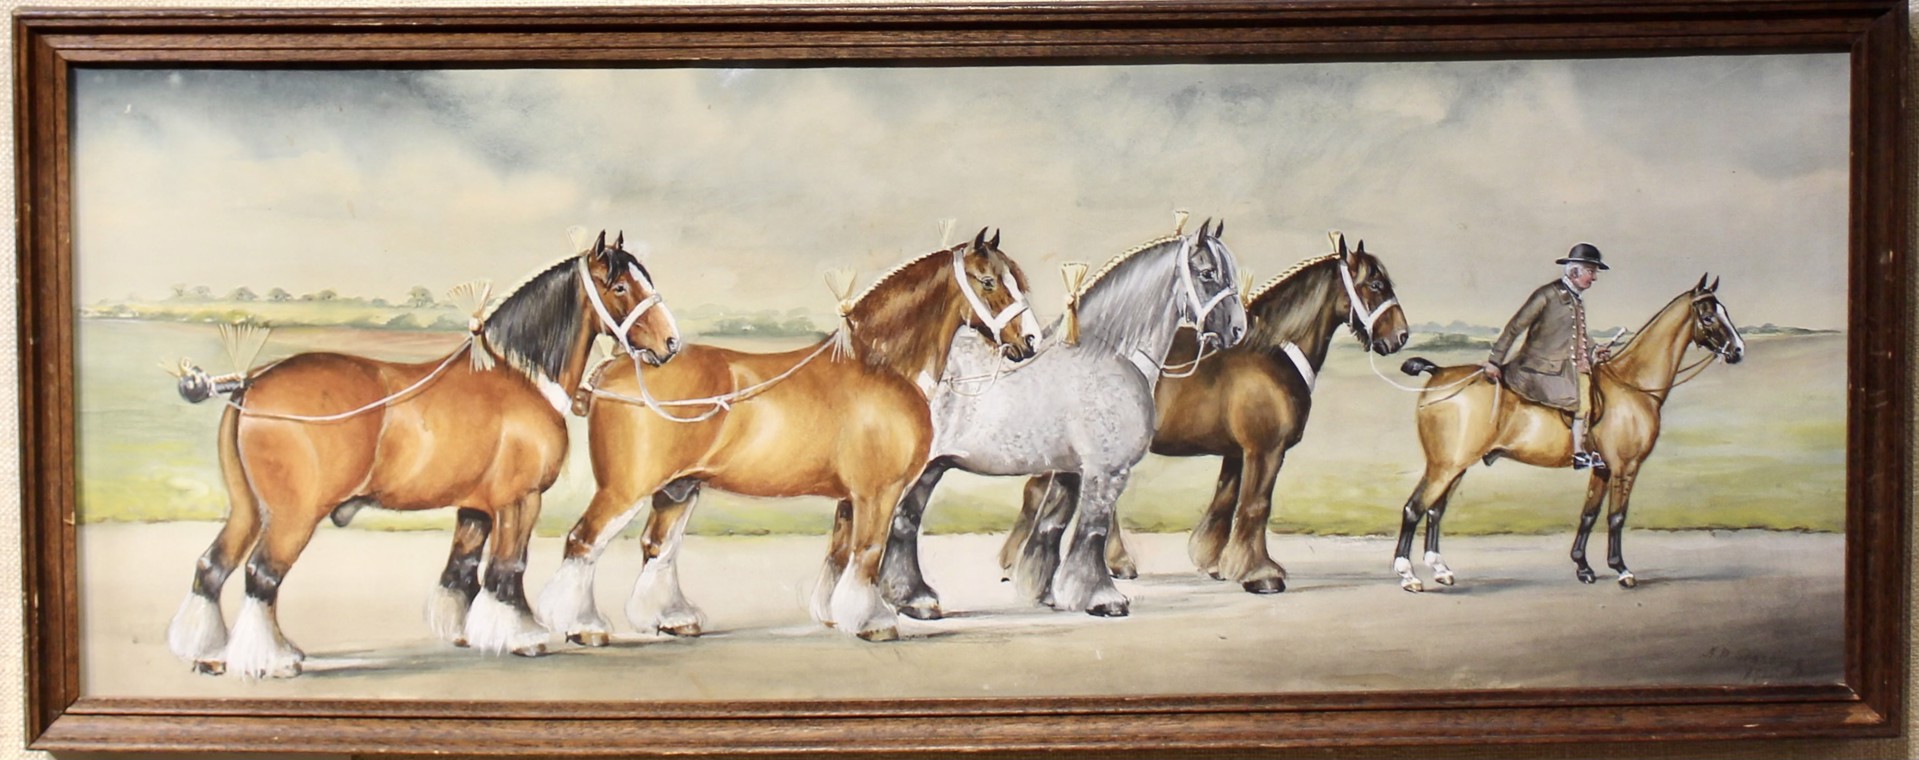 SHIRE HORSES (a pair) by William Henry Standing